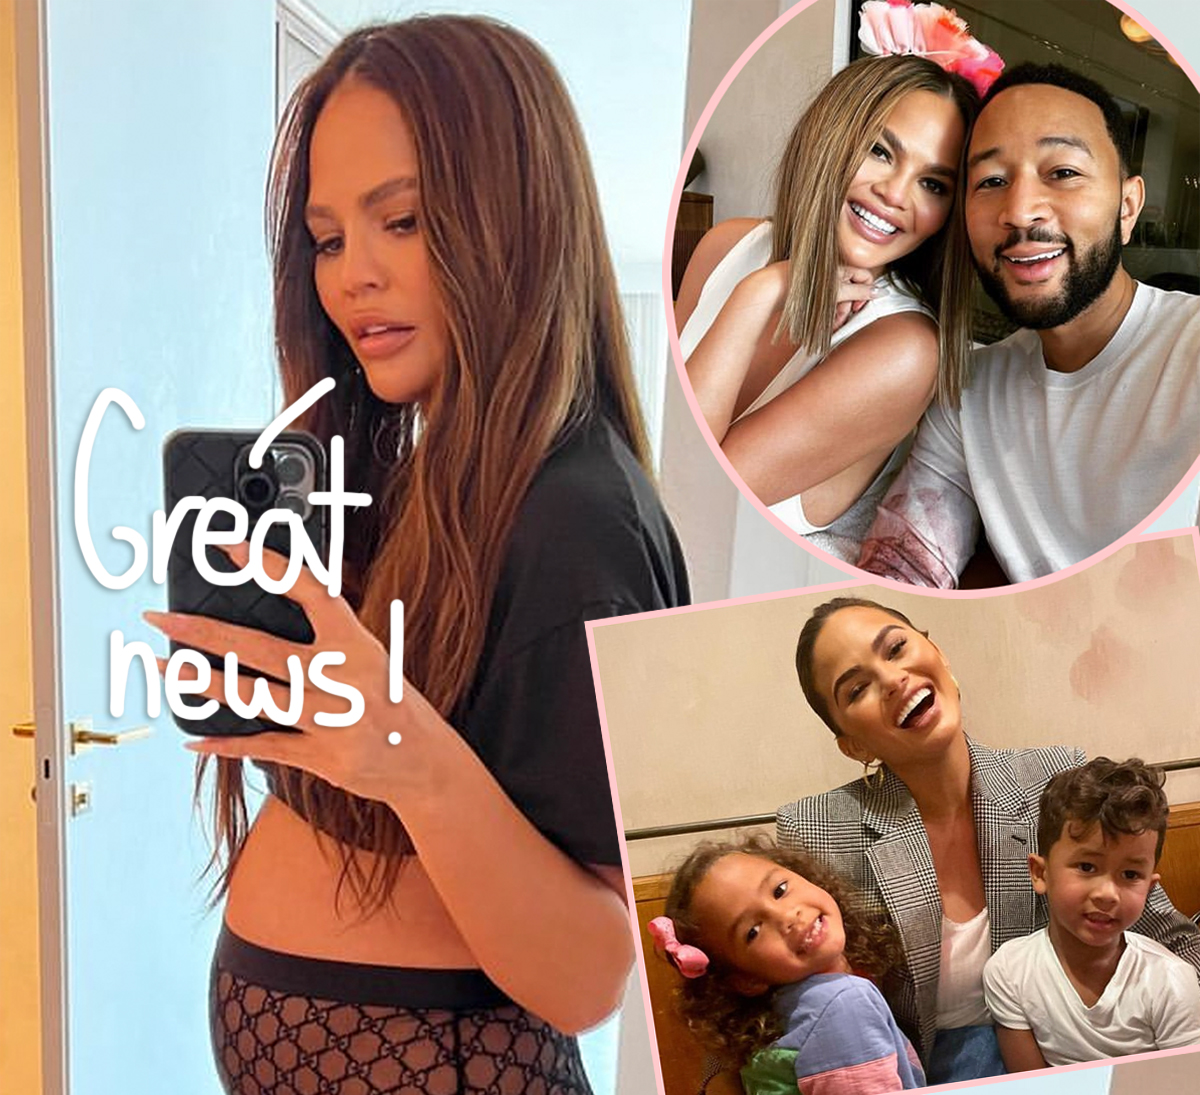 #Chrissy Teigen Is Pregnant Again Nearly Two Years After The Loss Of Her & John Legend’s Son Jack